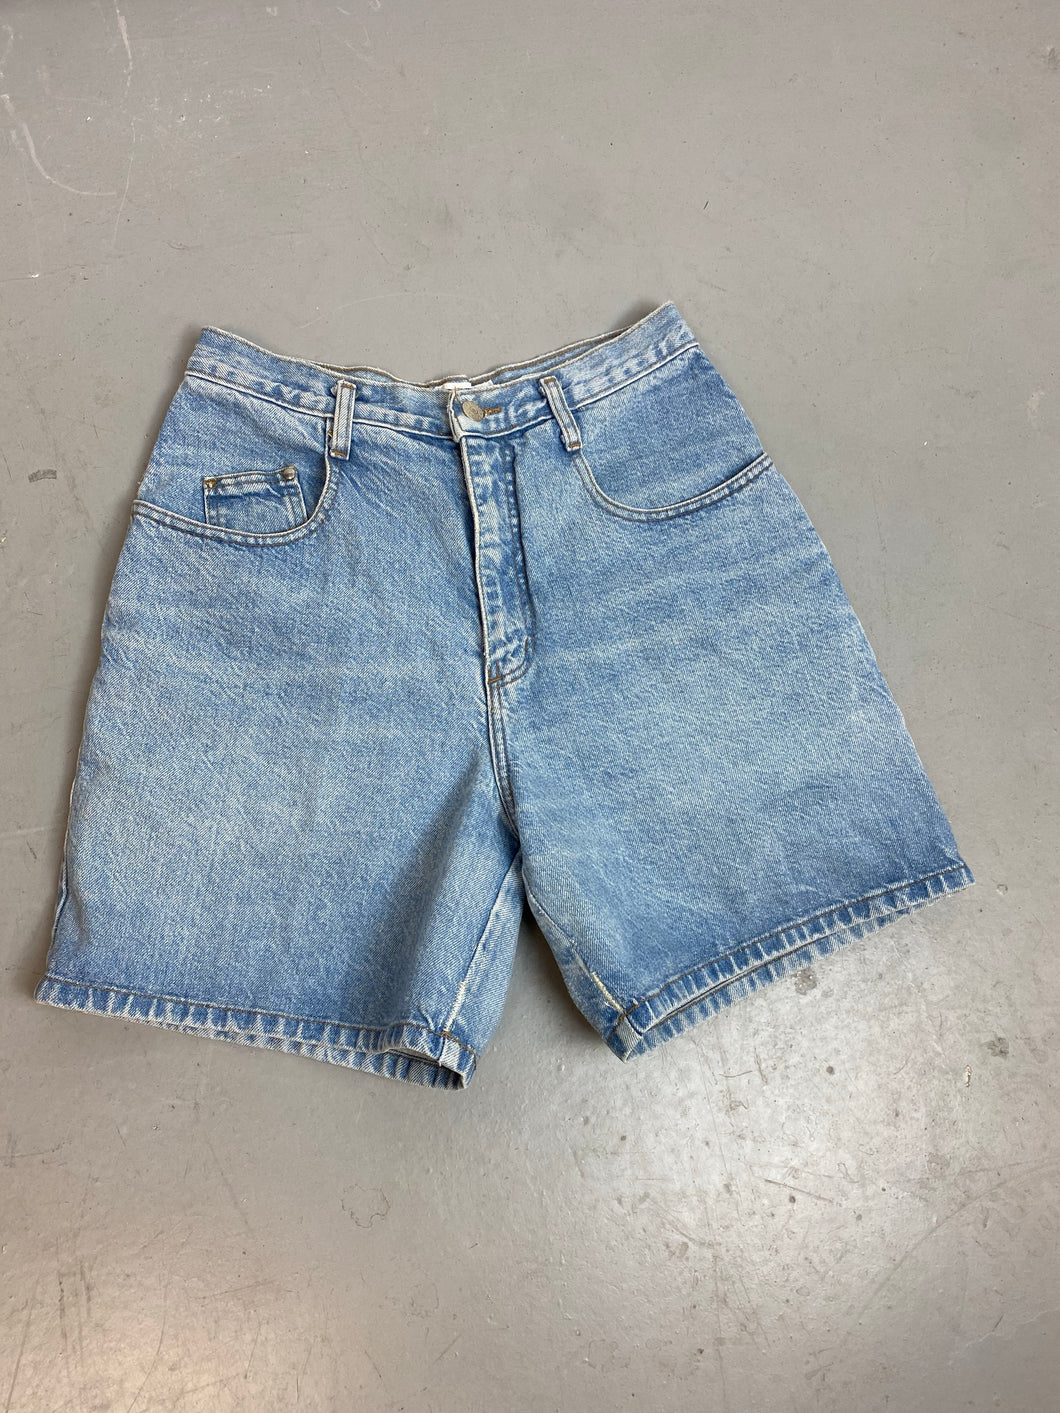 Vintage High Waisted Mixed Blues Hemmed Denim Shorts - 29in